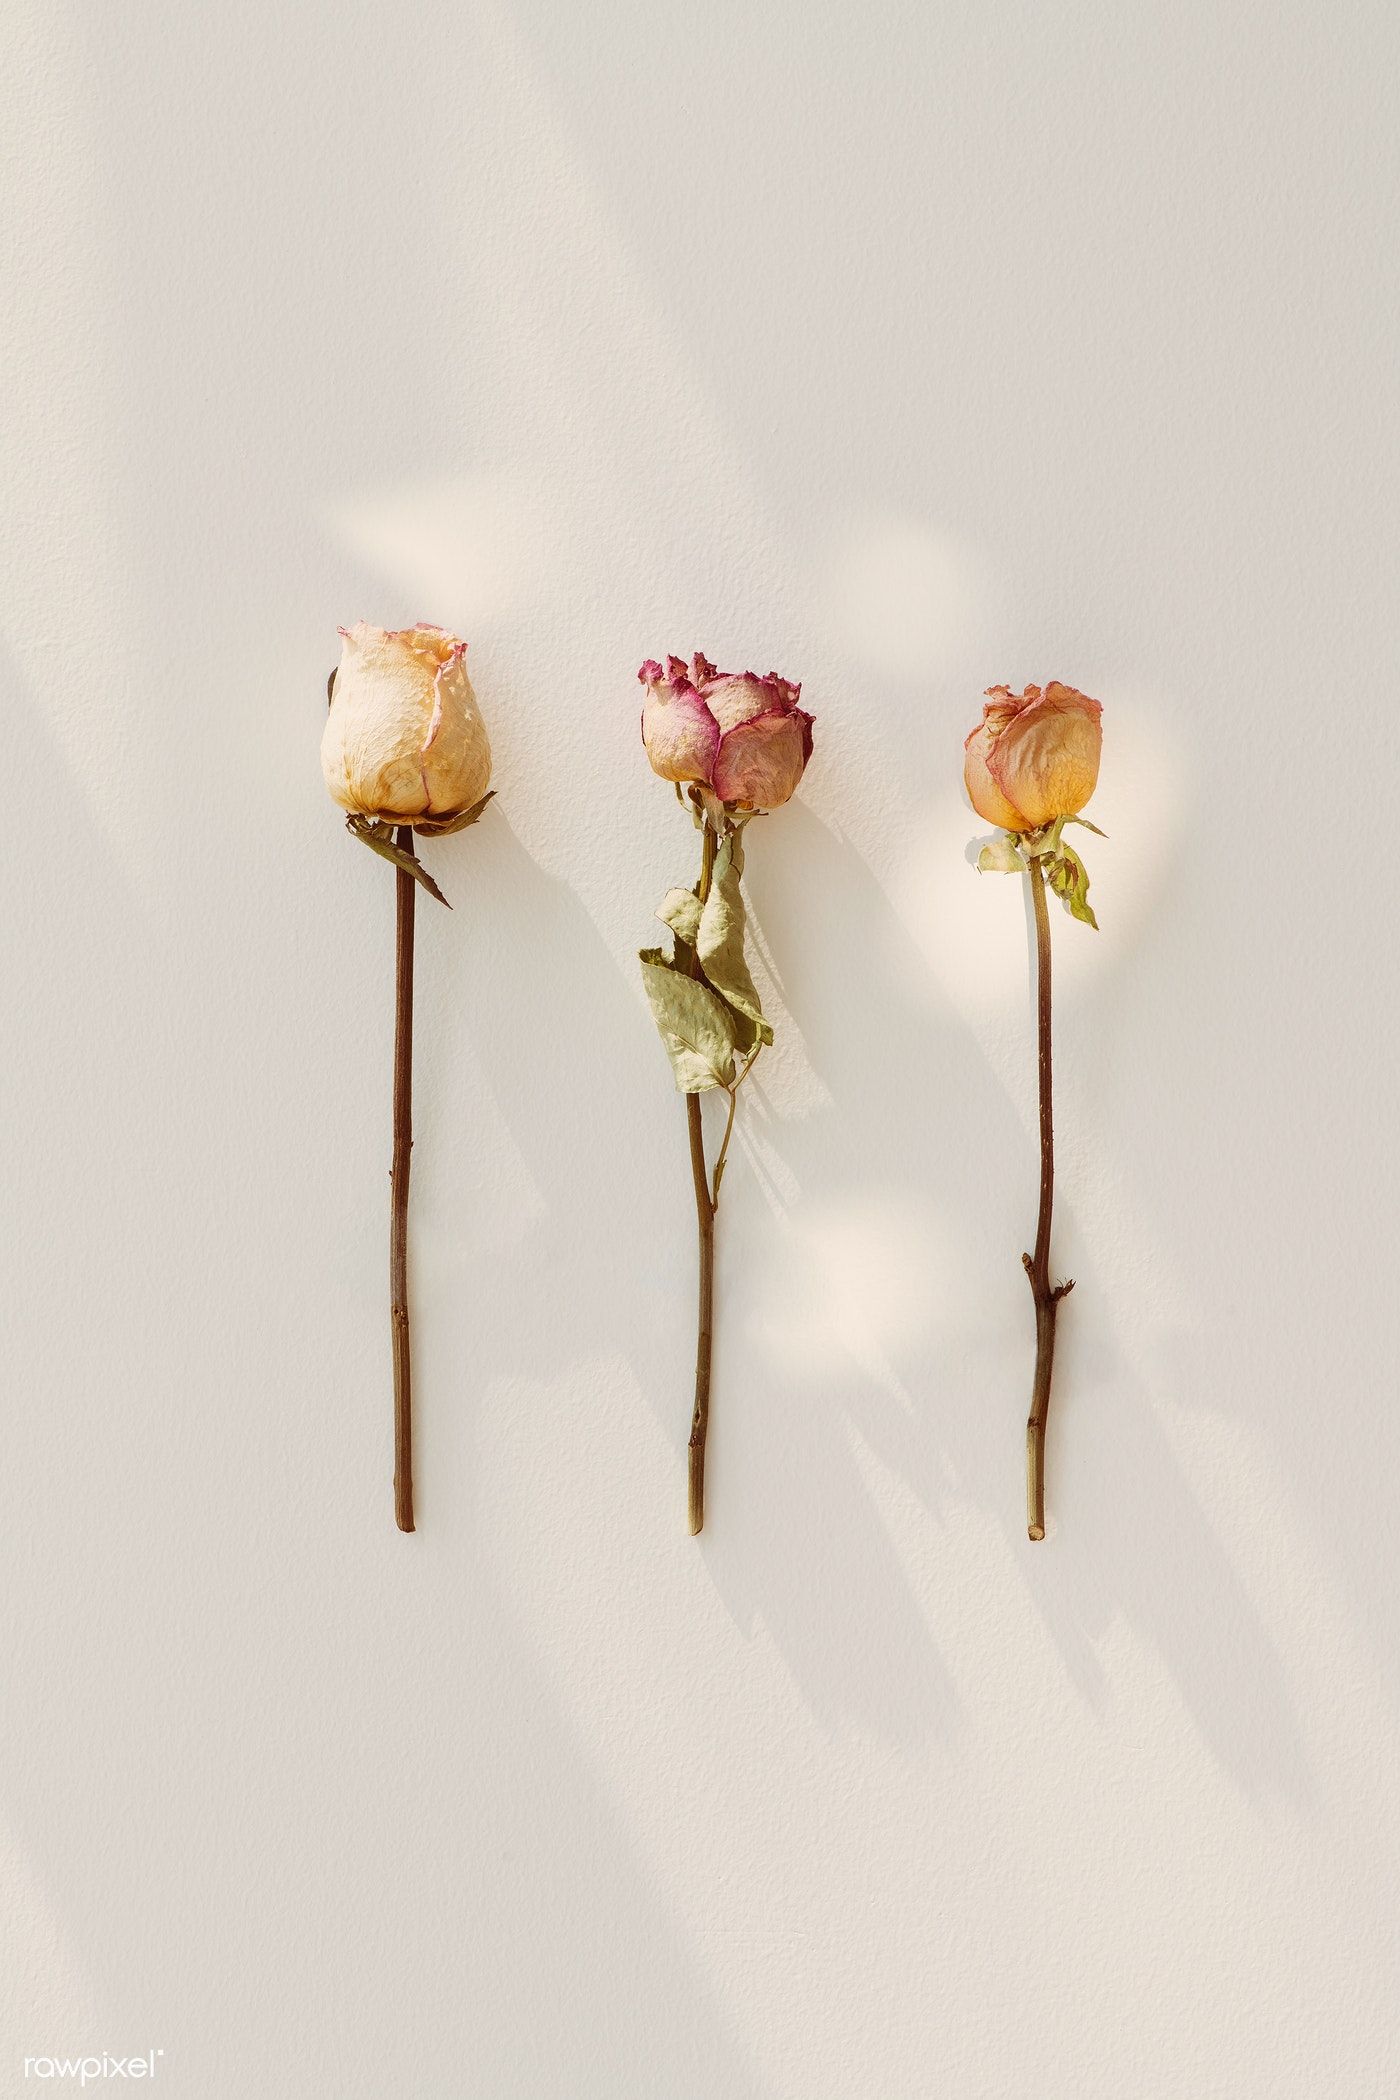 Download premium image of Dried roses on a white background flatlay 2329482. Roses wallpaper aesthetic, Wallpaper nature flowers, Rose white background